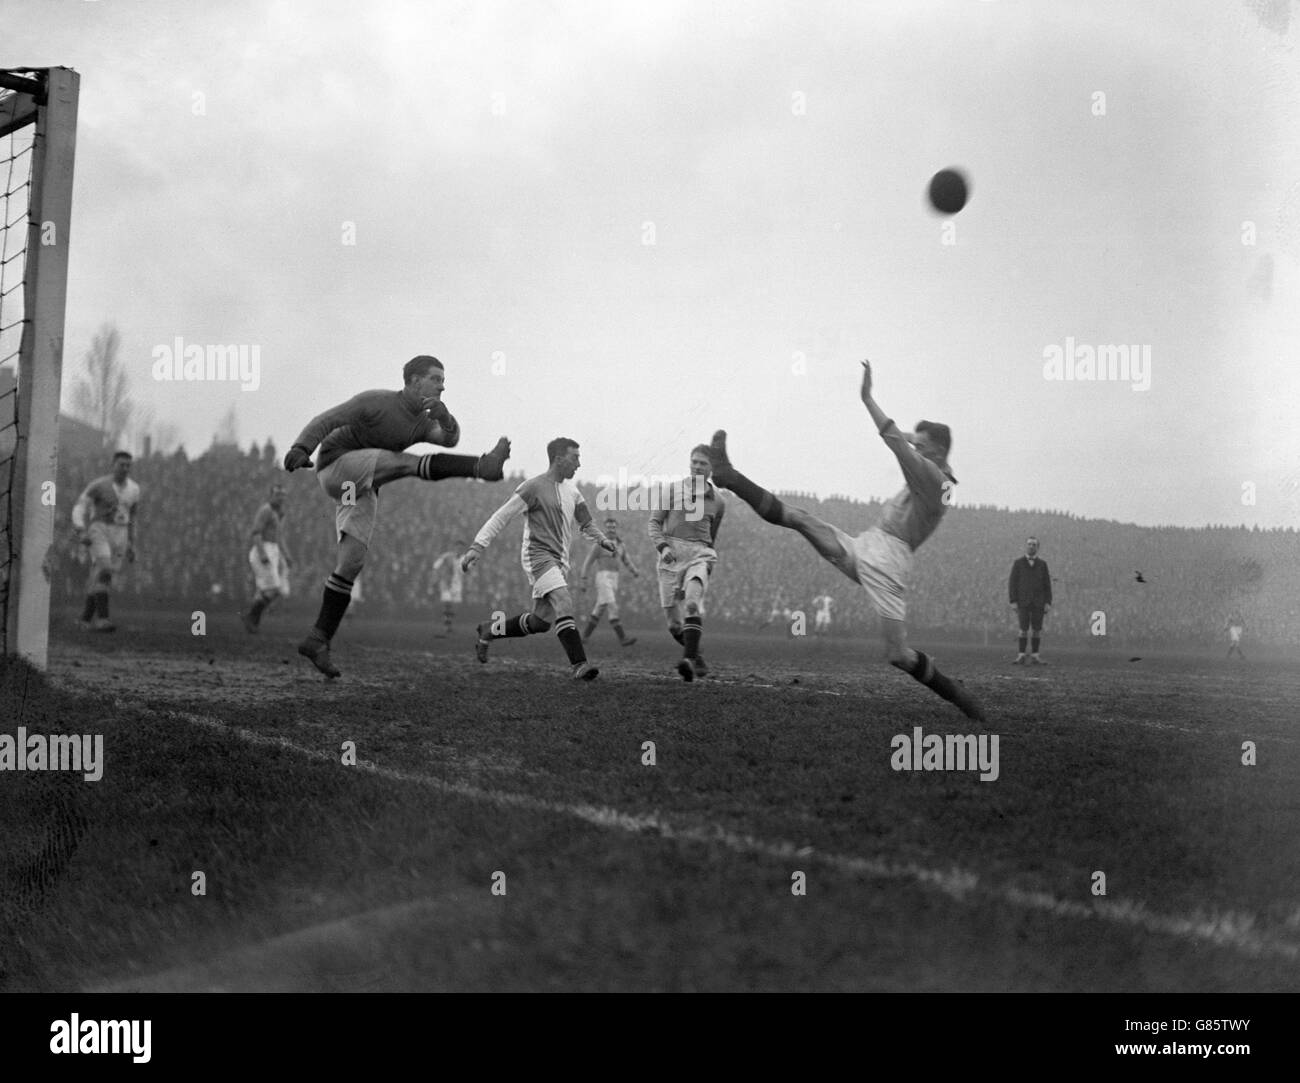 Soccer - FA Cup - Blackburn Rovers v Portsmouth - Highbury. Blackburn goalkeeper Sewell makes a hefty clearance during their match against Portsmouth at Highbury. Stock Photo